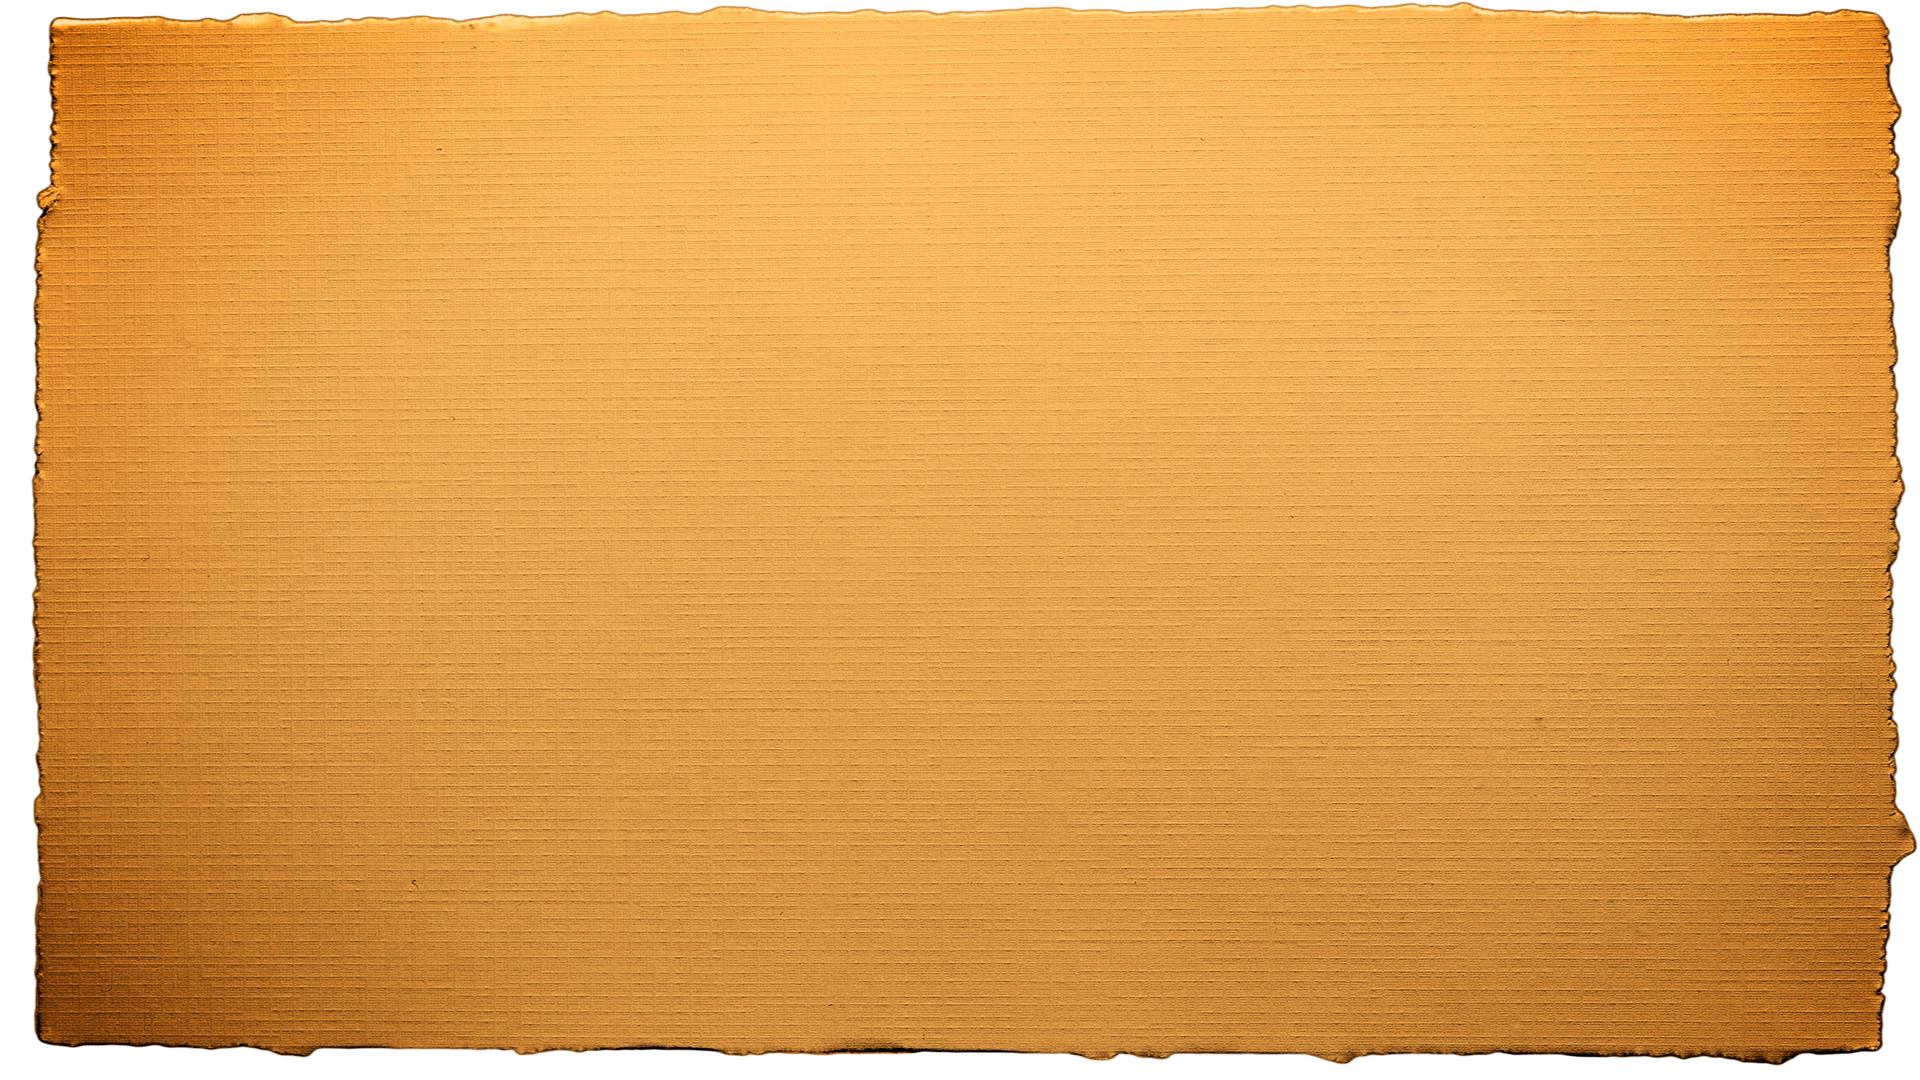 1920x1080 yellow-orange-torn-paper-background-hd | Paper Backgrounds